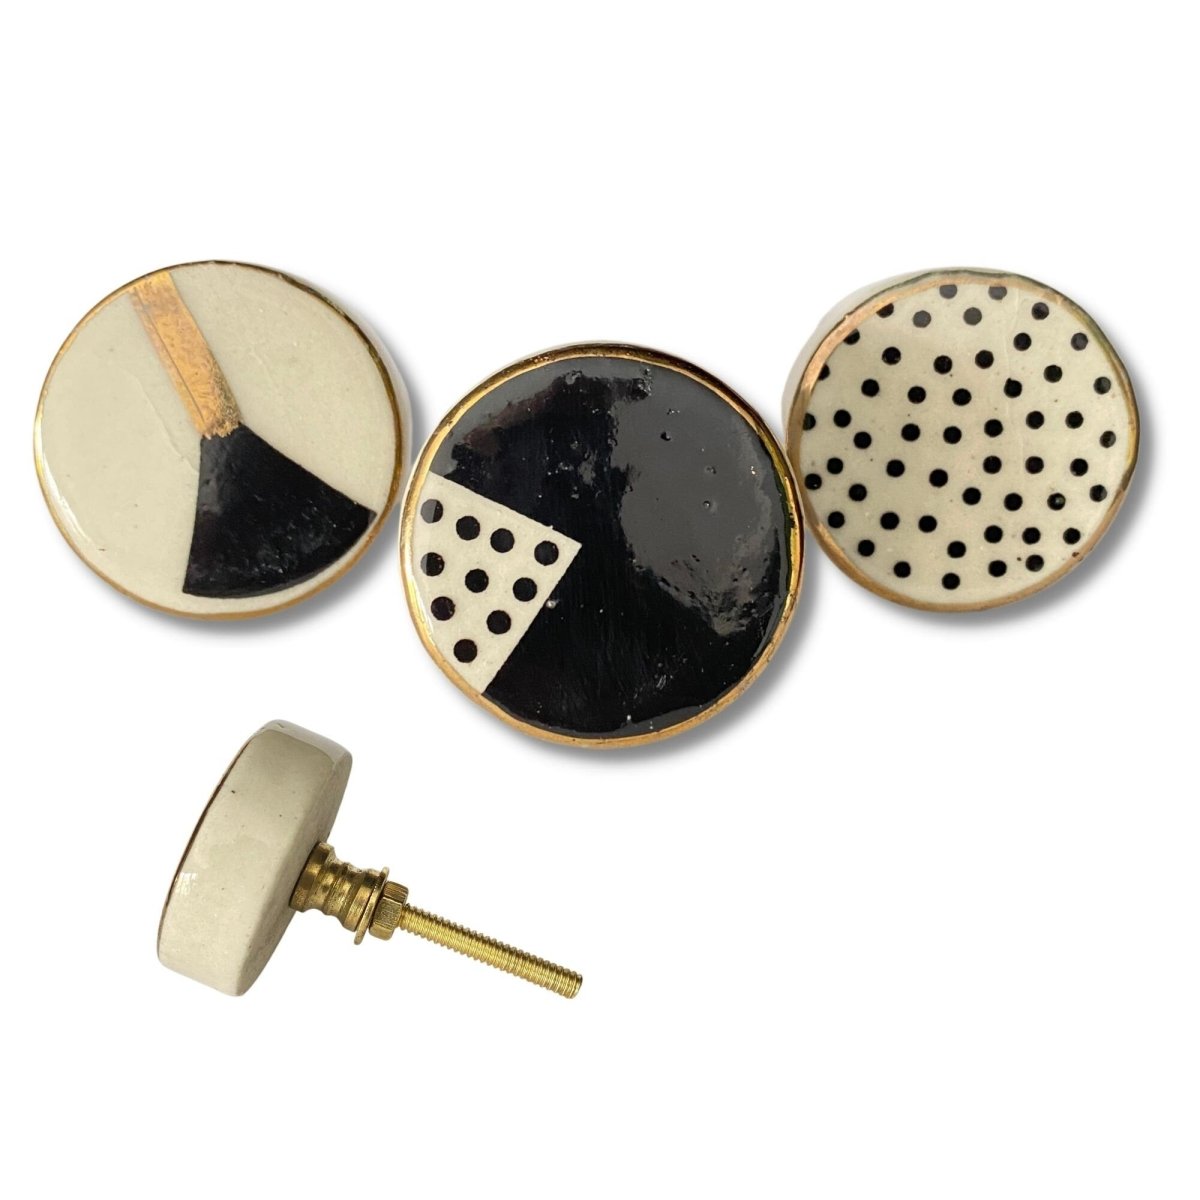 Hand Painted Ceramic Knobs in Black Cream White and Gold - DaRosa Creations